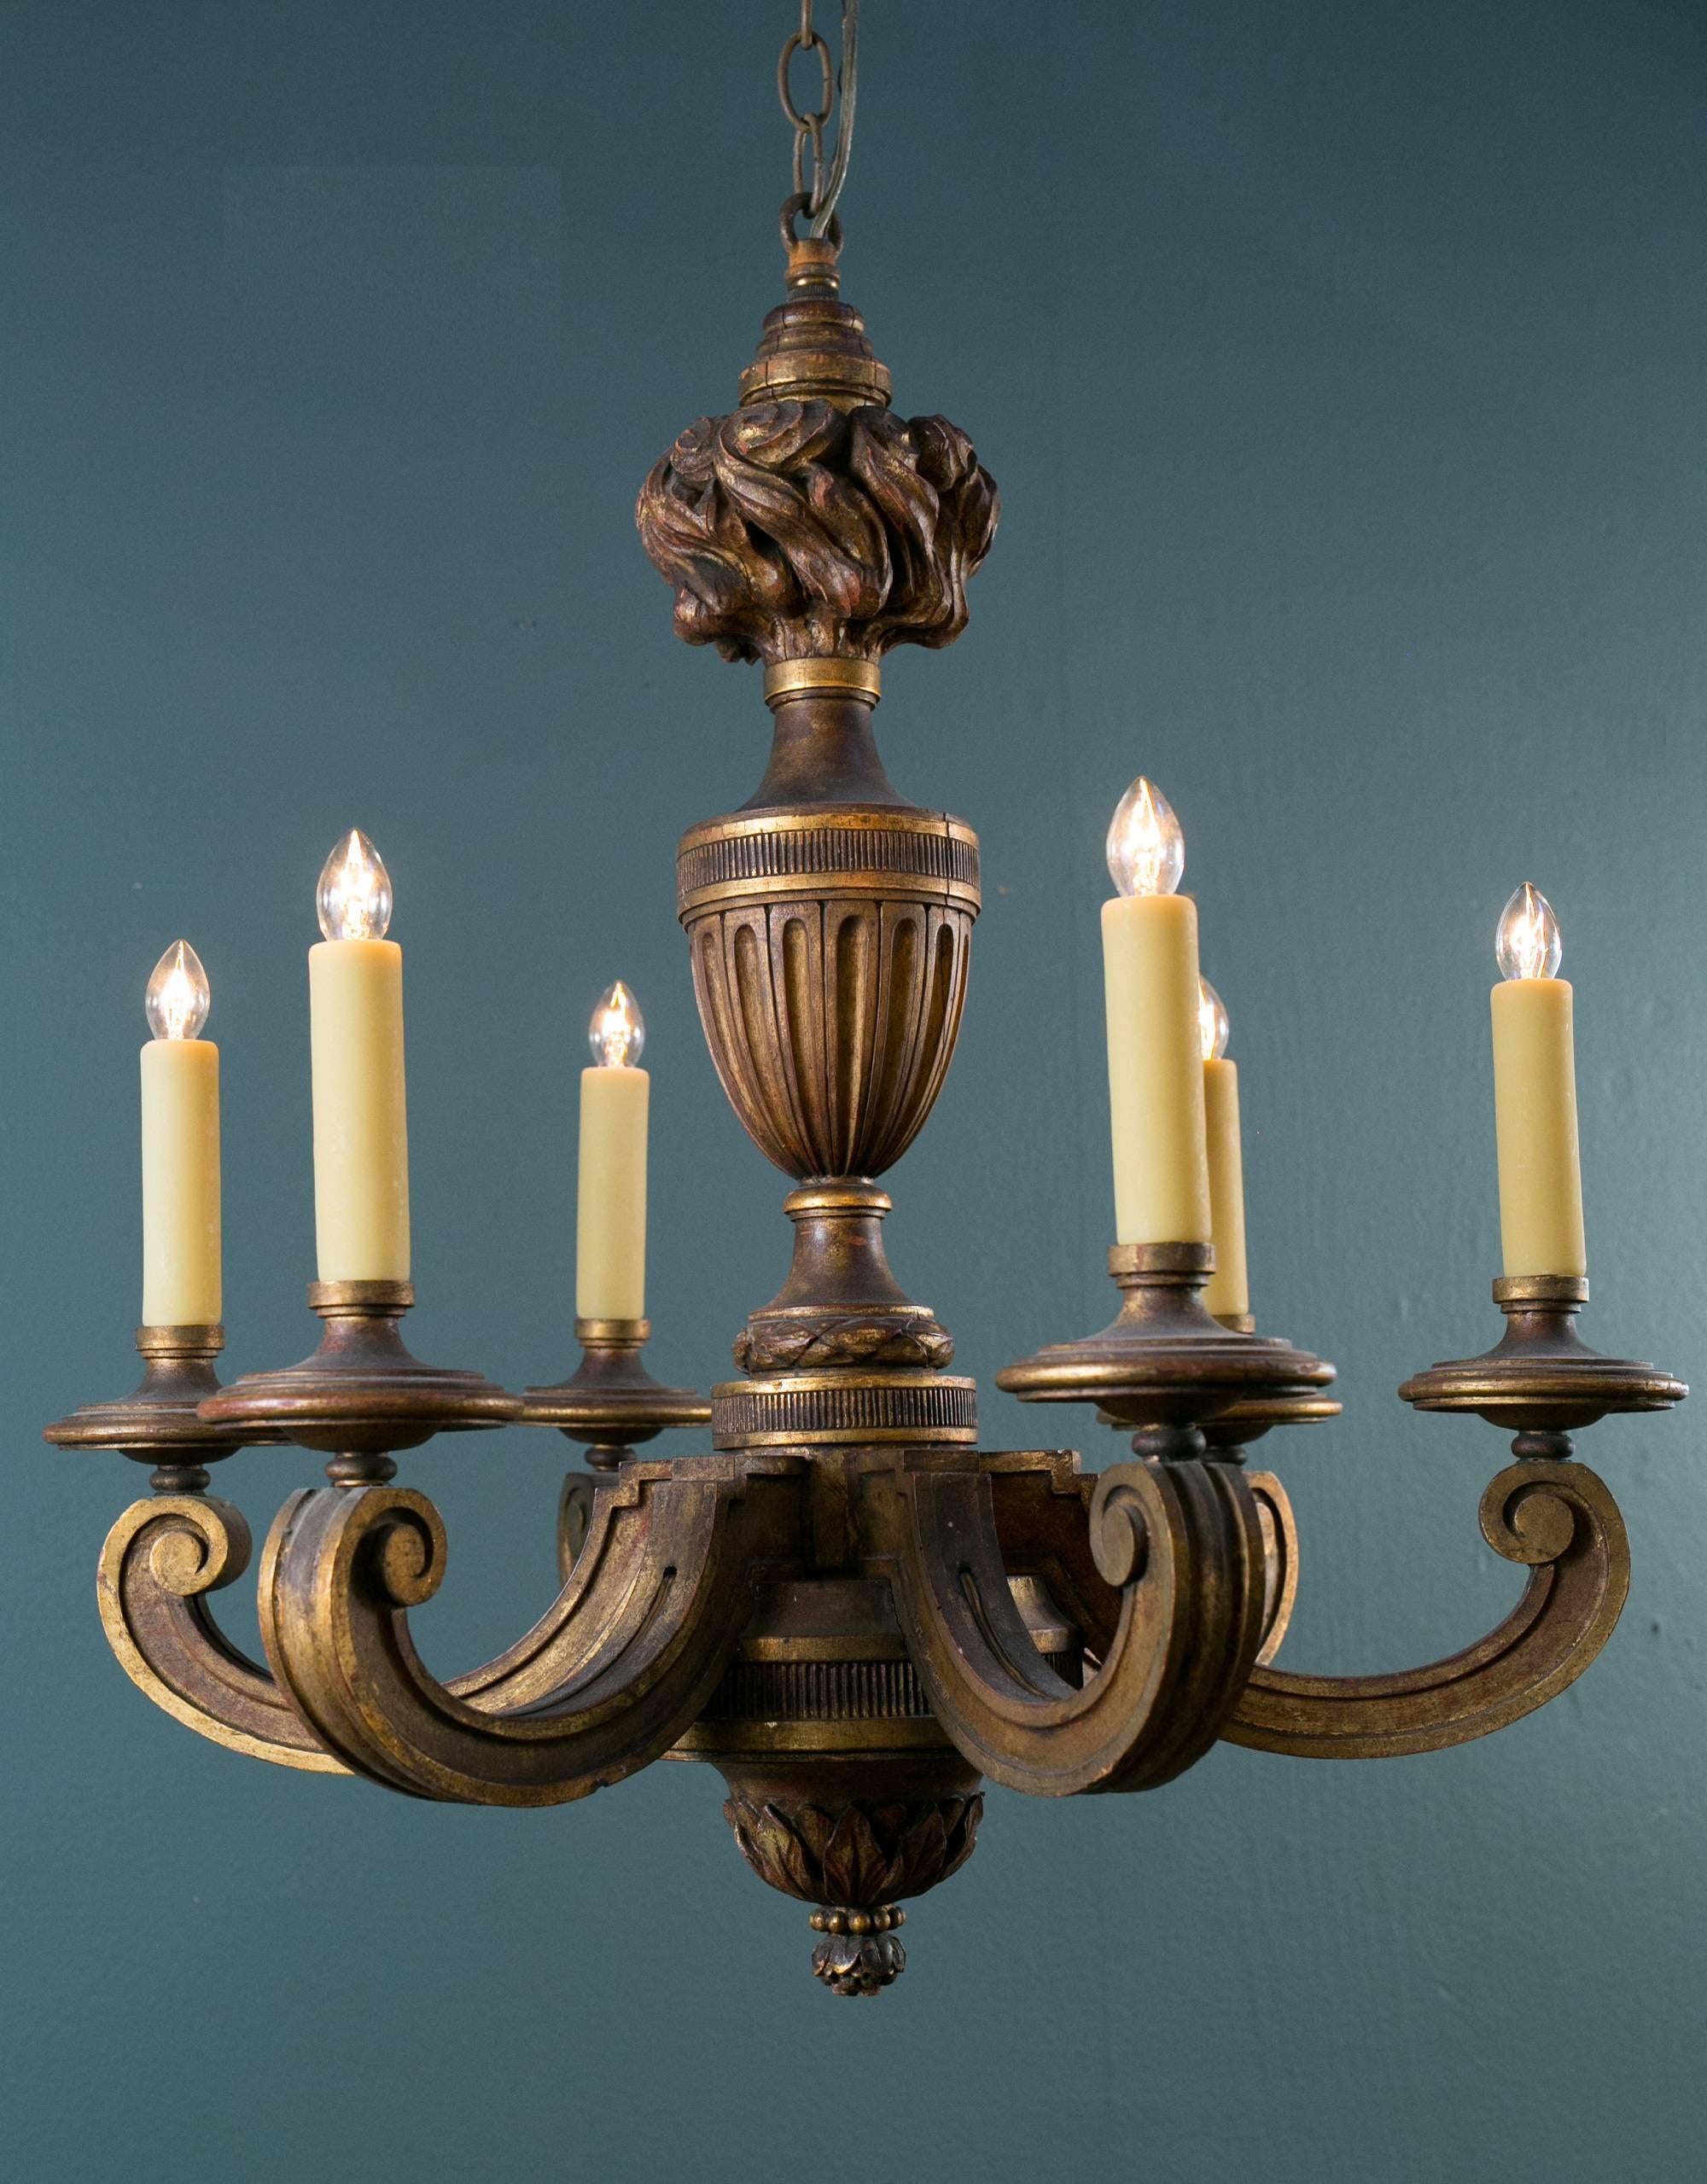 Antique bois dore, carved gilt wood chandelier from France, circa 1890.   Empire in the Neoclassical style.  Masterfully hand-carved with a  torch flame finial at the top and an acorn finial at the base. Six candelabra sockets, newly wired in the